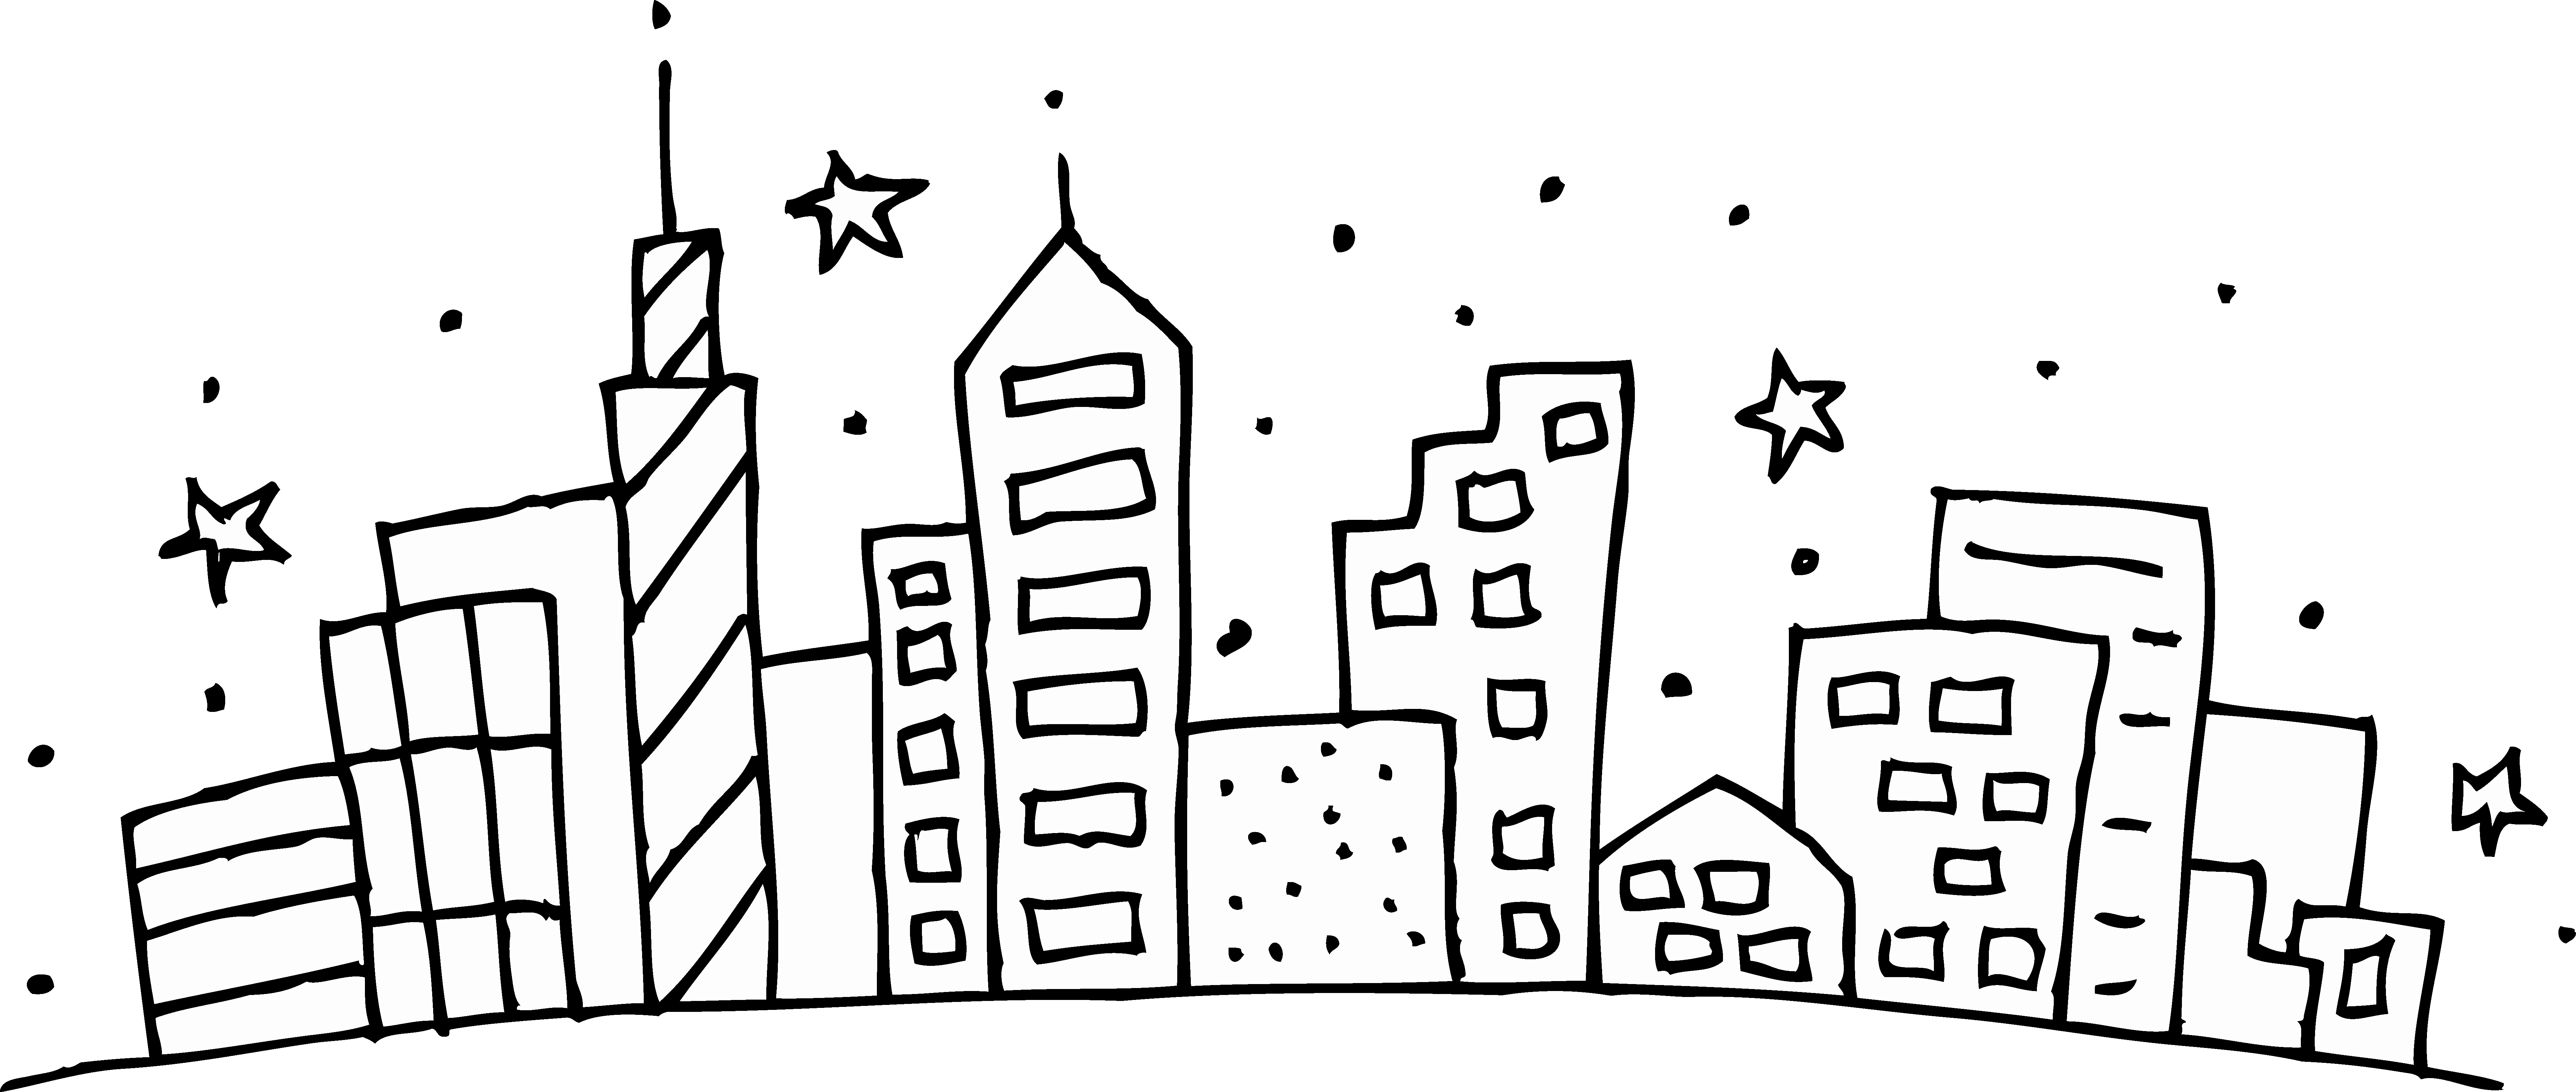 City Coloring Page Collection Of Free Cities Clipart Coloring Page Download On Ui Ex